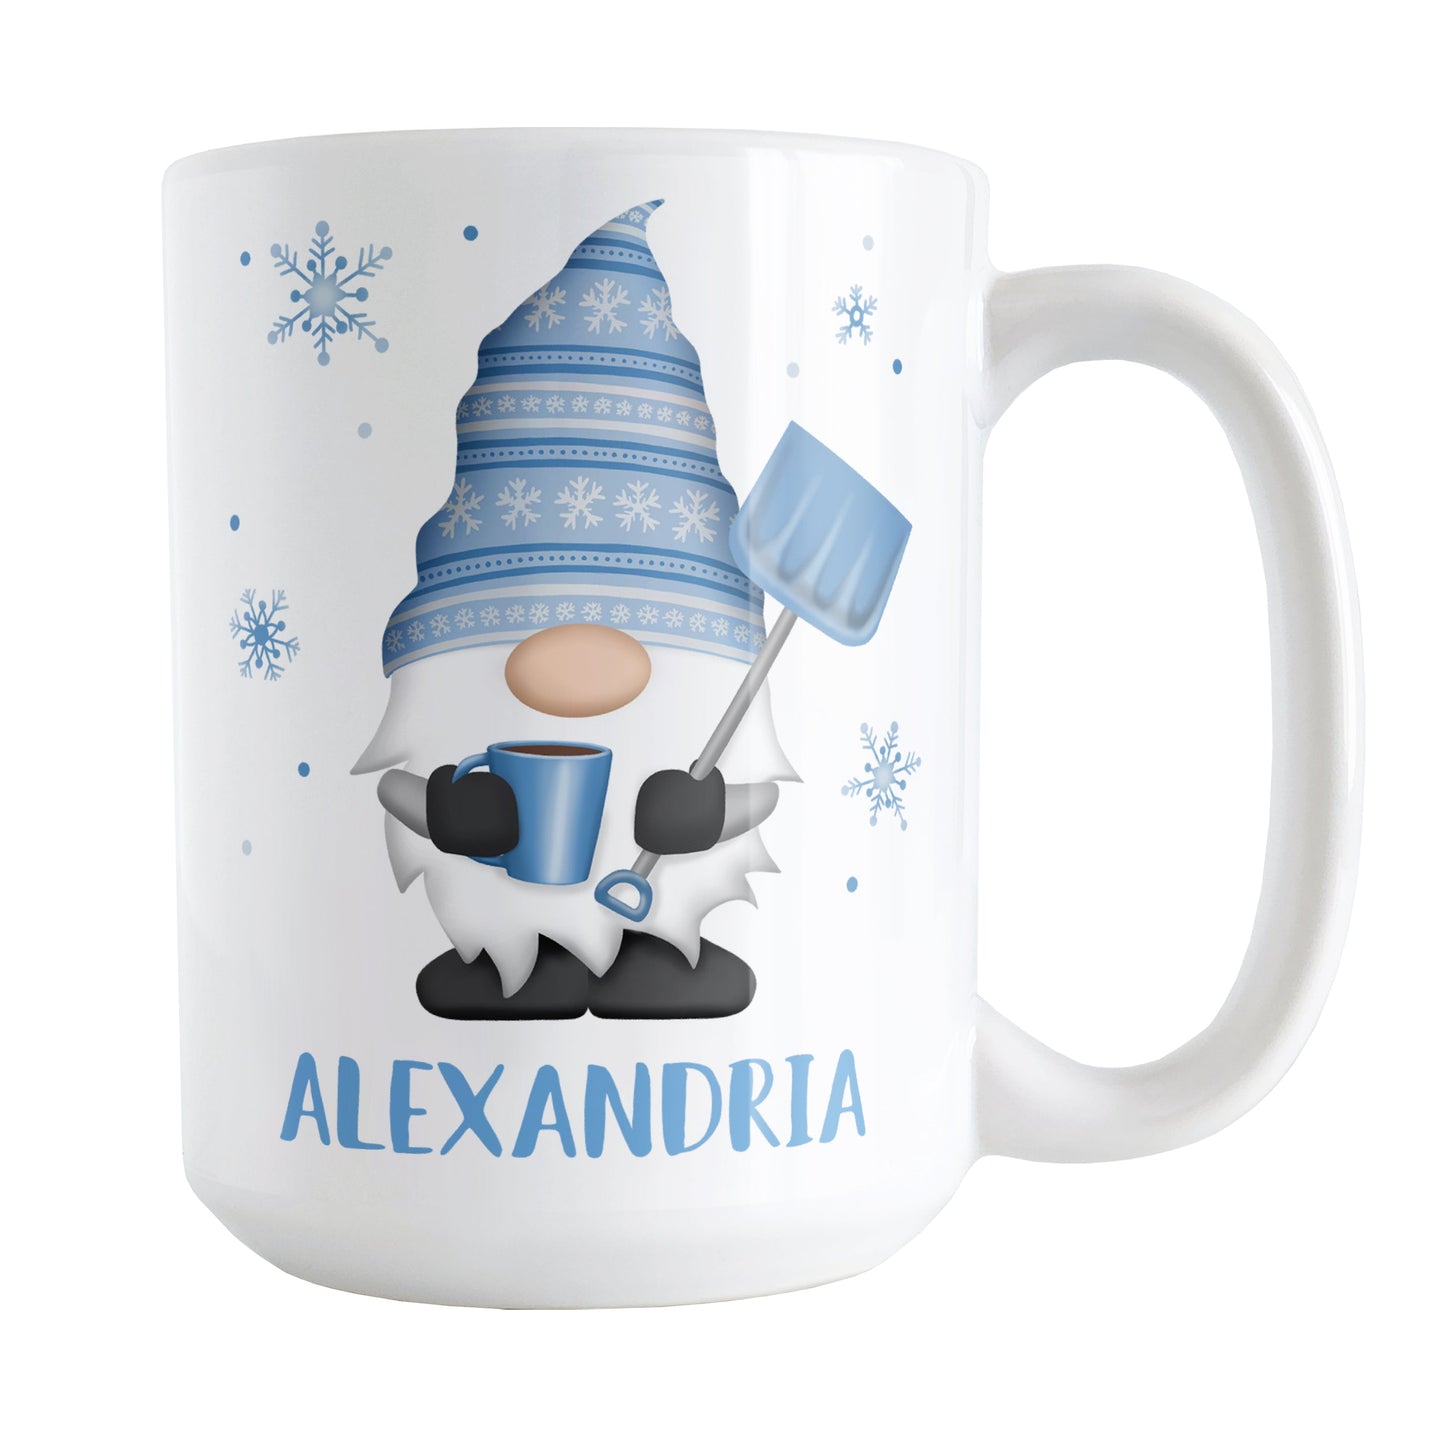 Personalized Winter Snowflake Gnome Mug (15oz) at Amy's Coffee Mugs. A ceramic coffee mug designed with a gnome on both sides of the mug wearing a festive blue snowflake hat and holding a hot beverage and a snow shovel, with snowflakes around it. Your name is custom printed in blue below the gnome.